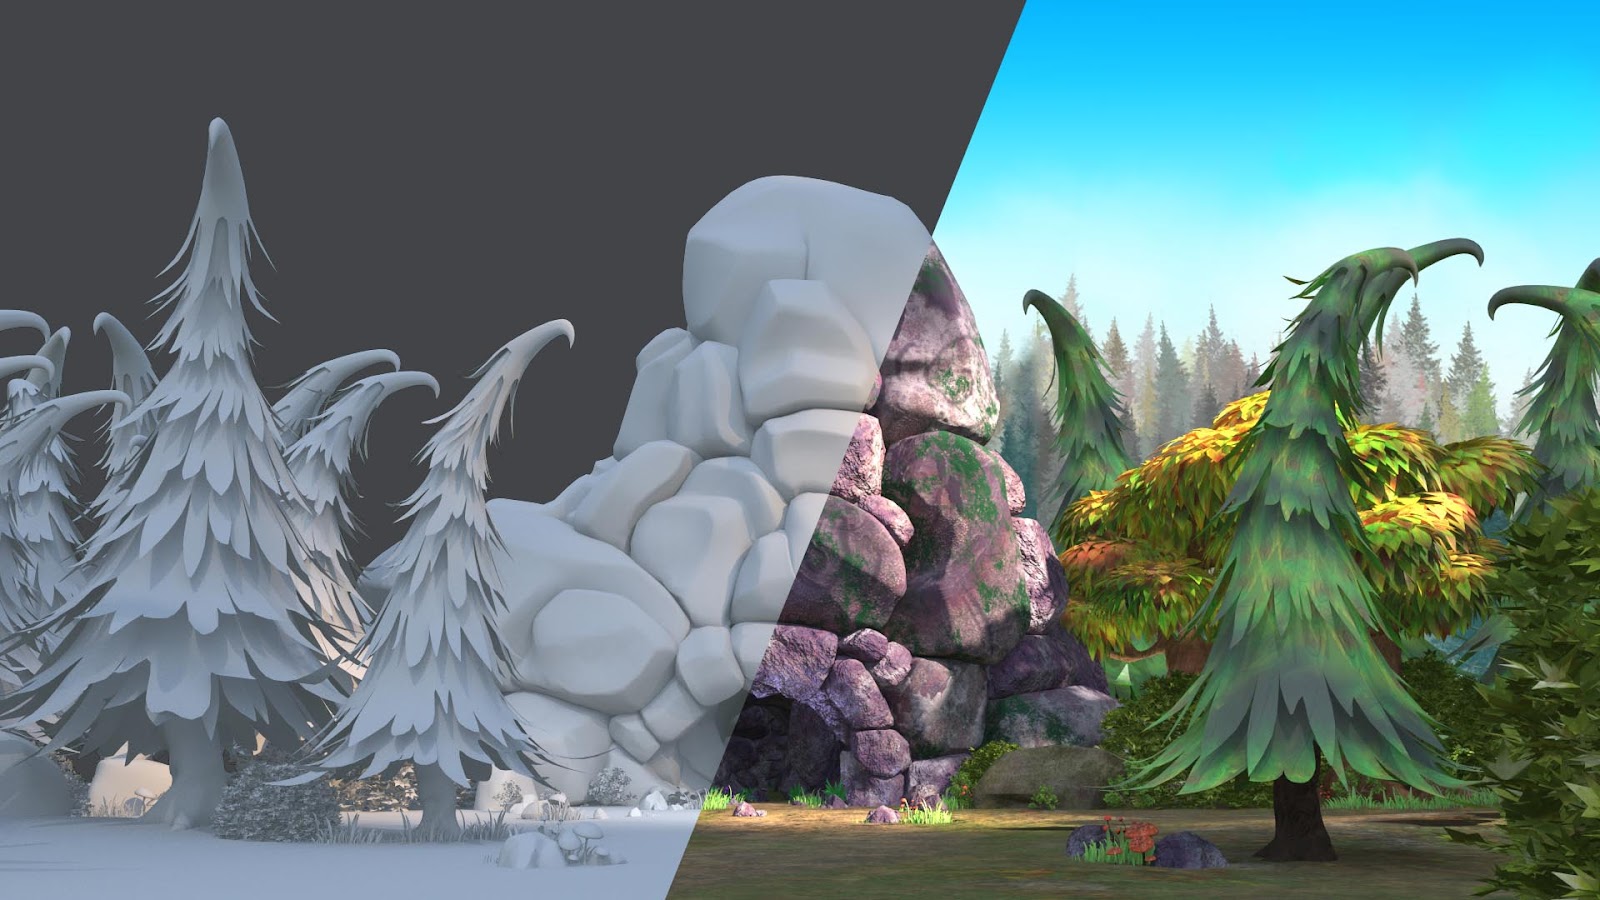 animation layouts can help create realistic 3D textures